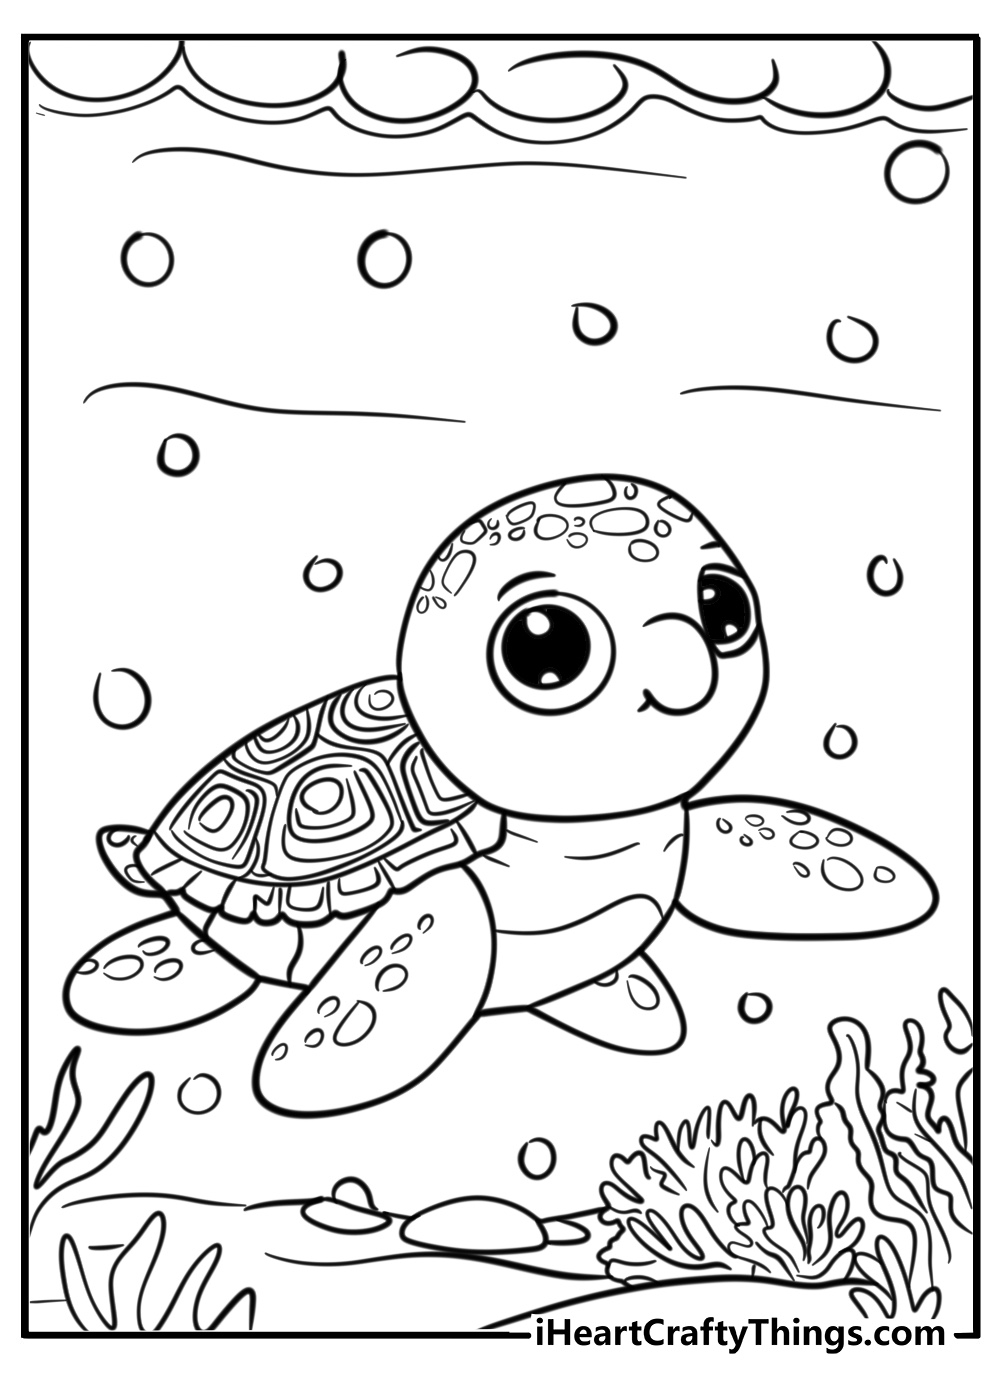 Sea turtle coloring page for kids